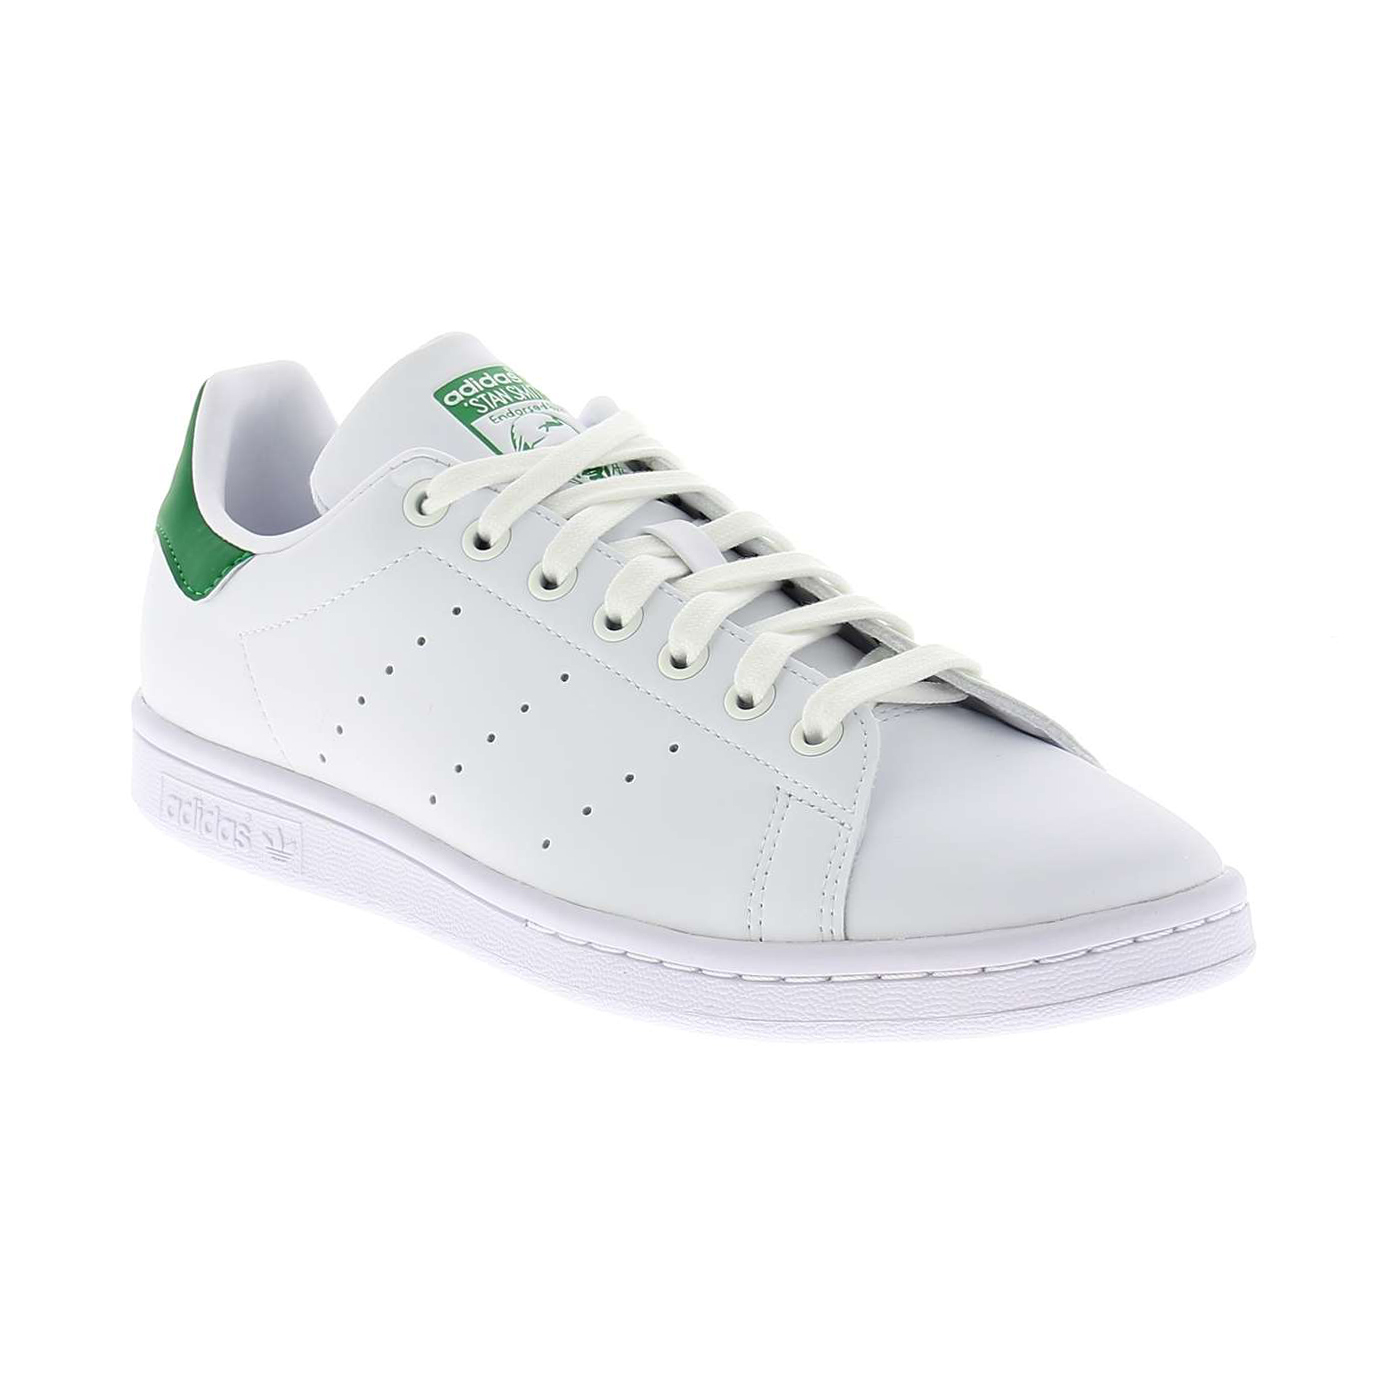 01 - STAN SMITH - ADIDAS - Baskets - Synthétique